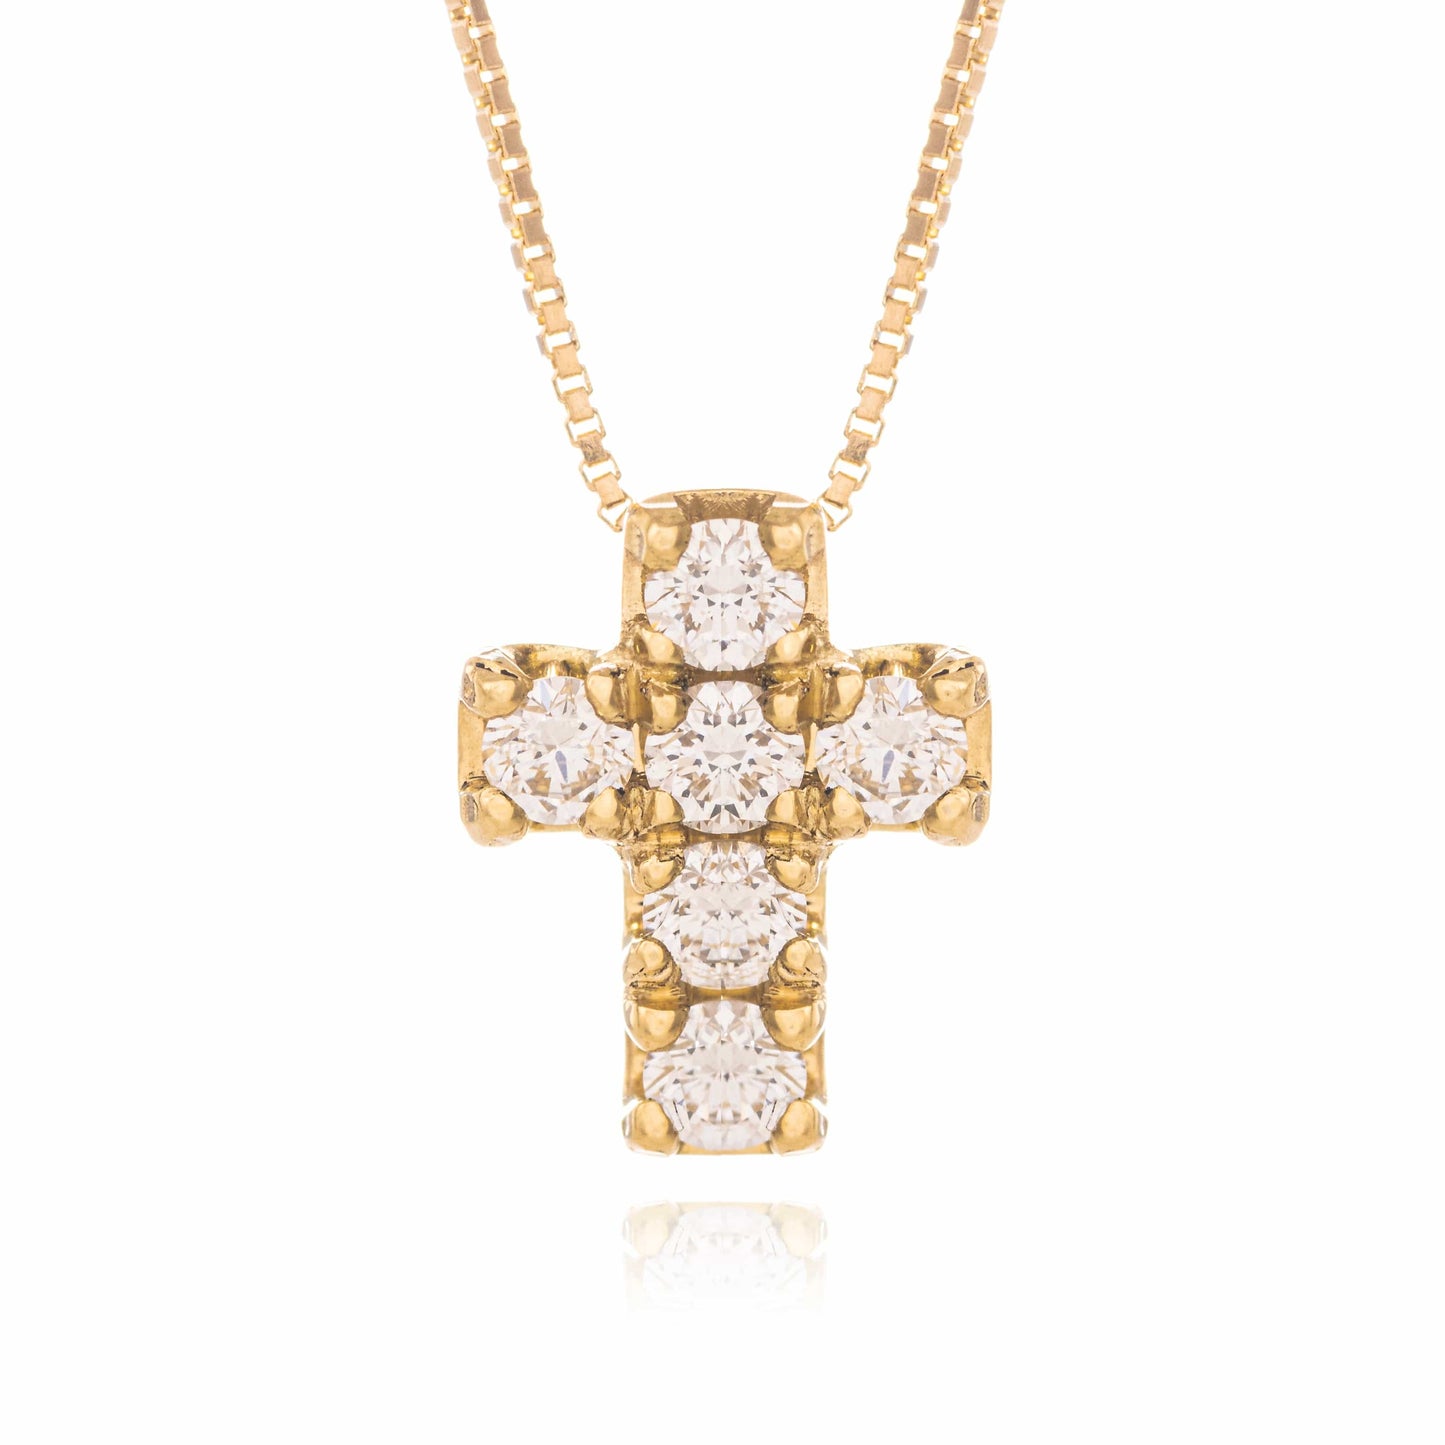 MONDO CATTOLICO Jewelry Cm 1 (0.39 in) / Cm 0.8 (0.31 in) Necklace with Yellow Gold Cross and Diamonds